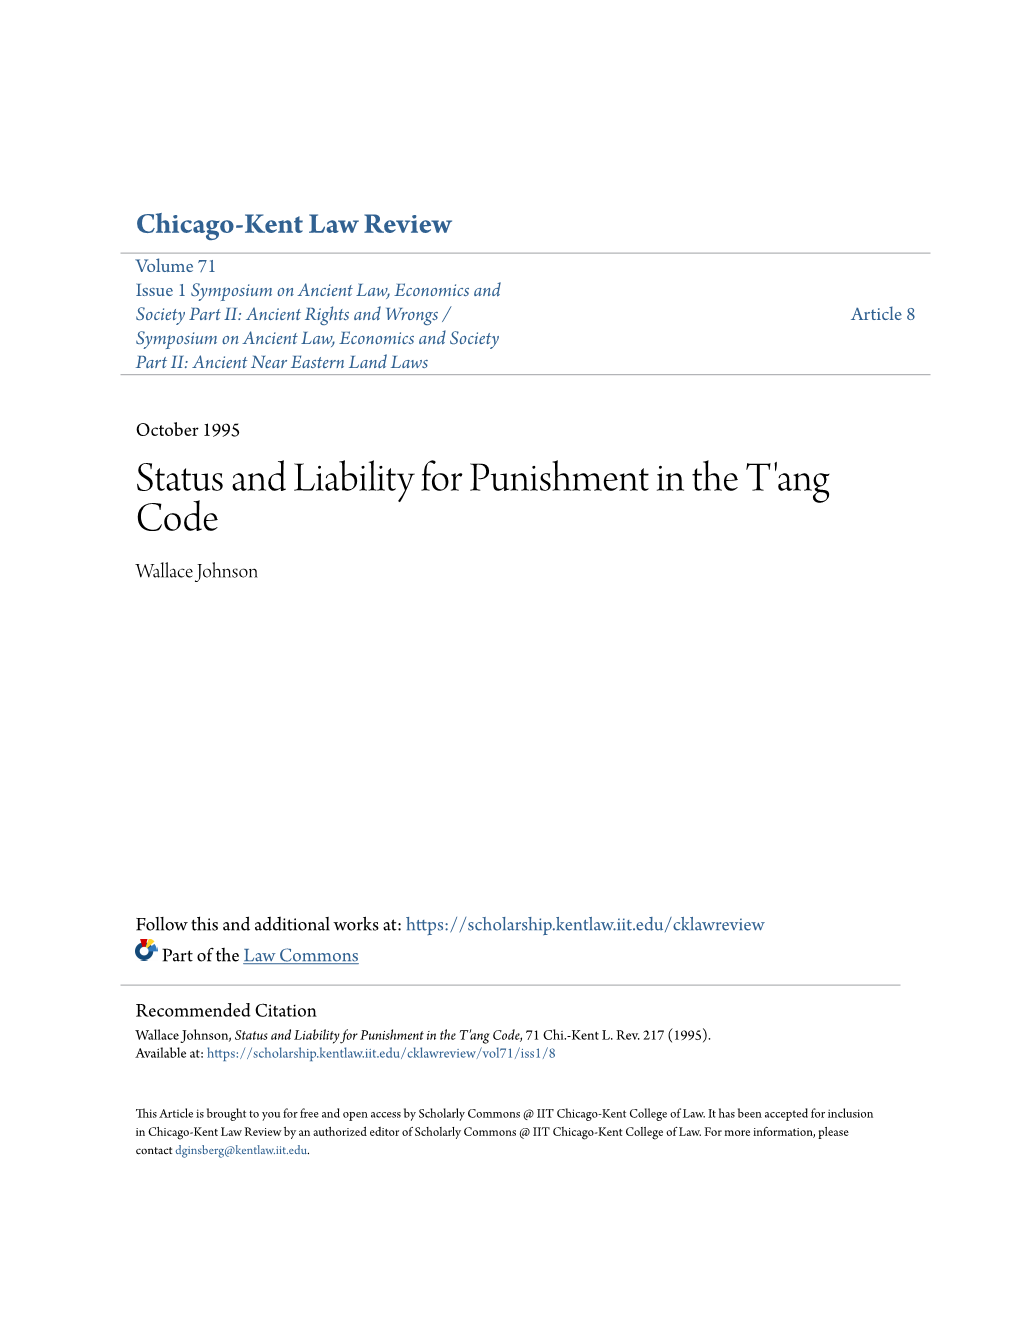 Status and Liability for Punishment in the T'ang Code Wallace Johnson